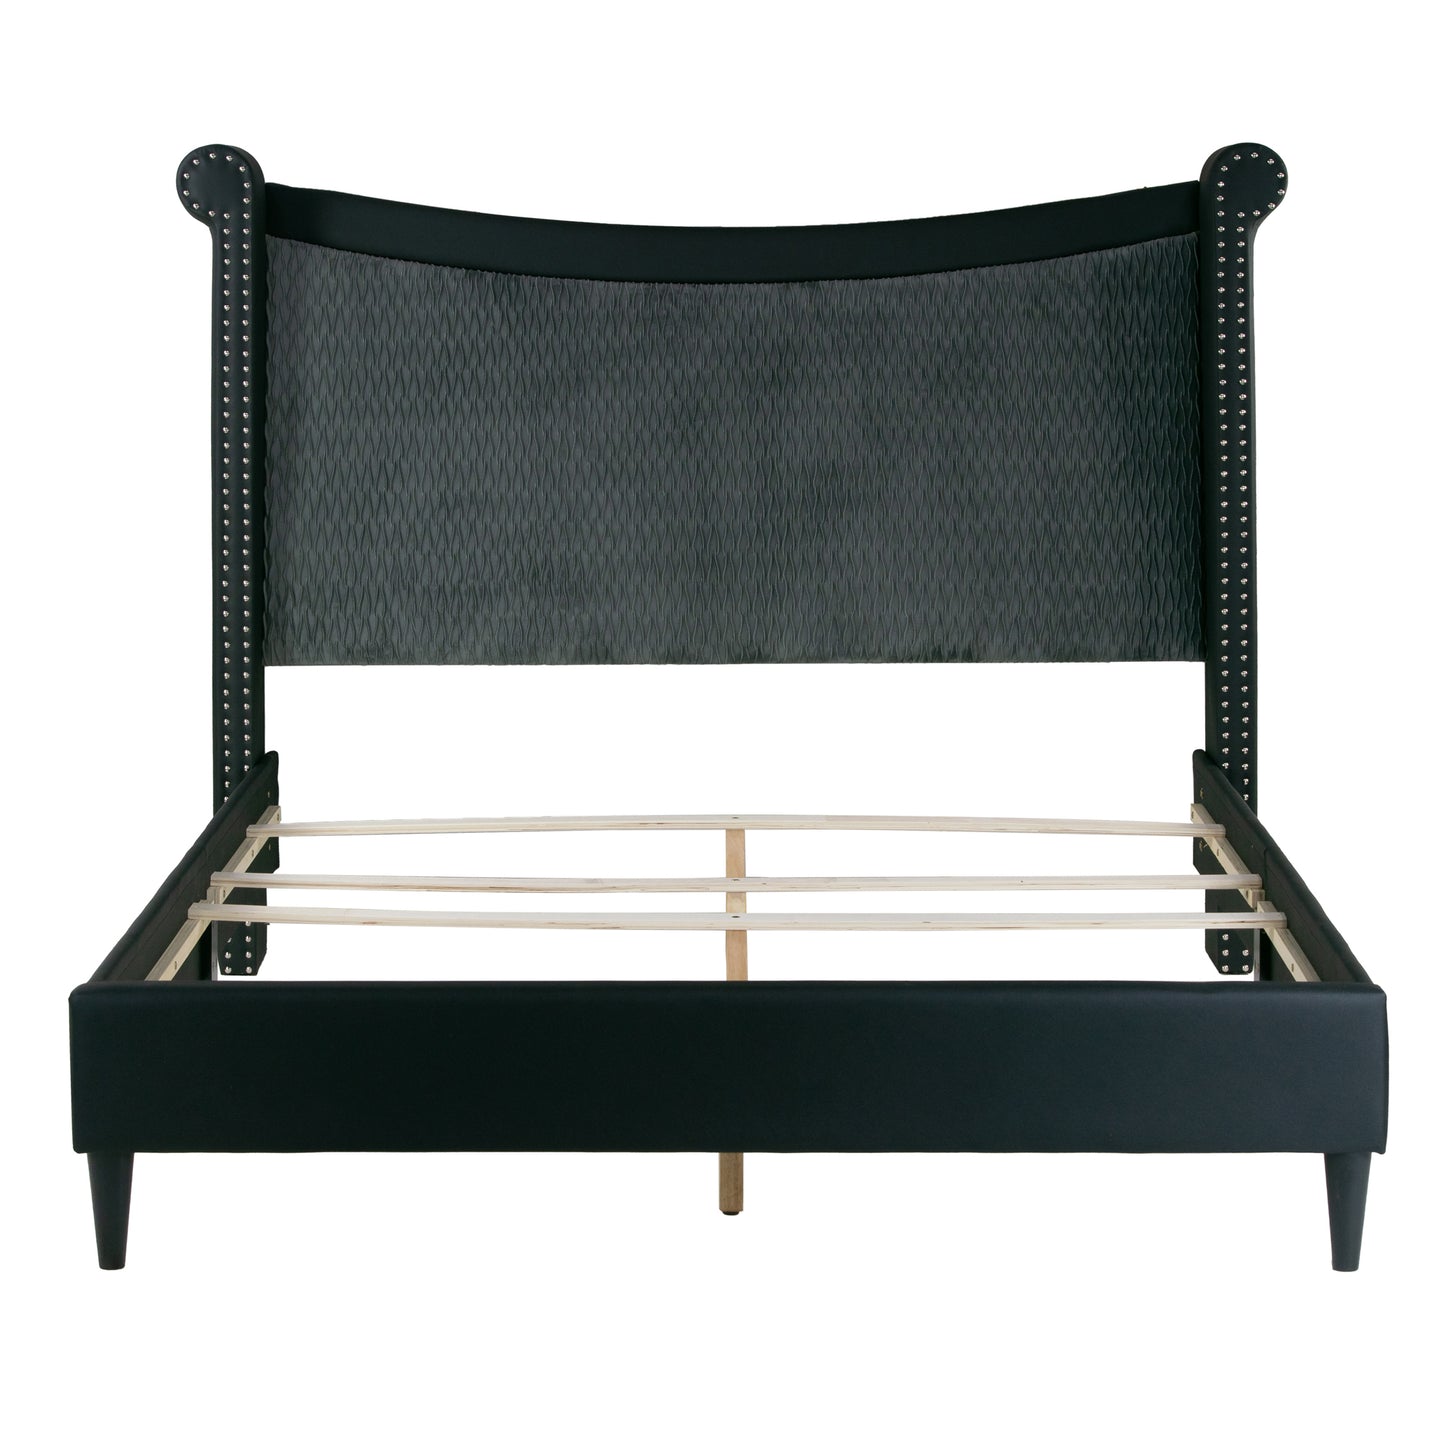 Ava Black Upholstered Queen Bed with Nail Heads